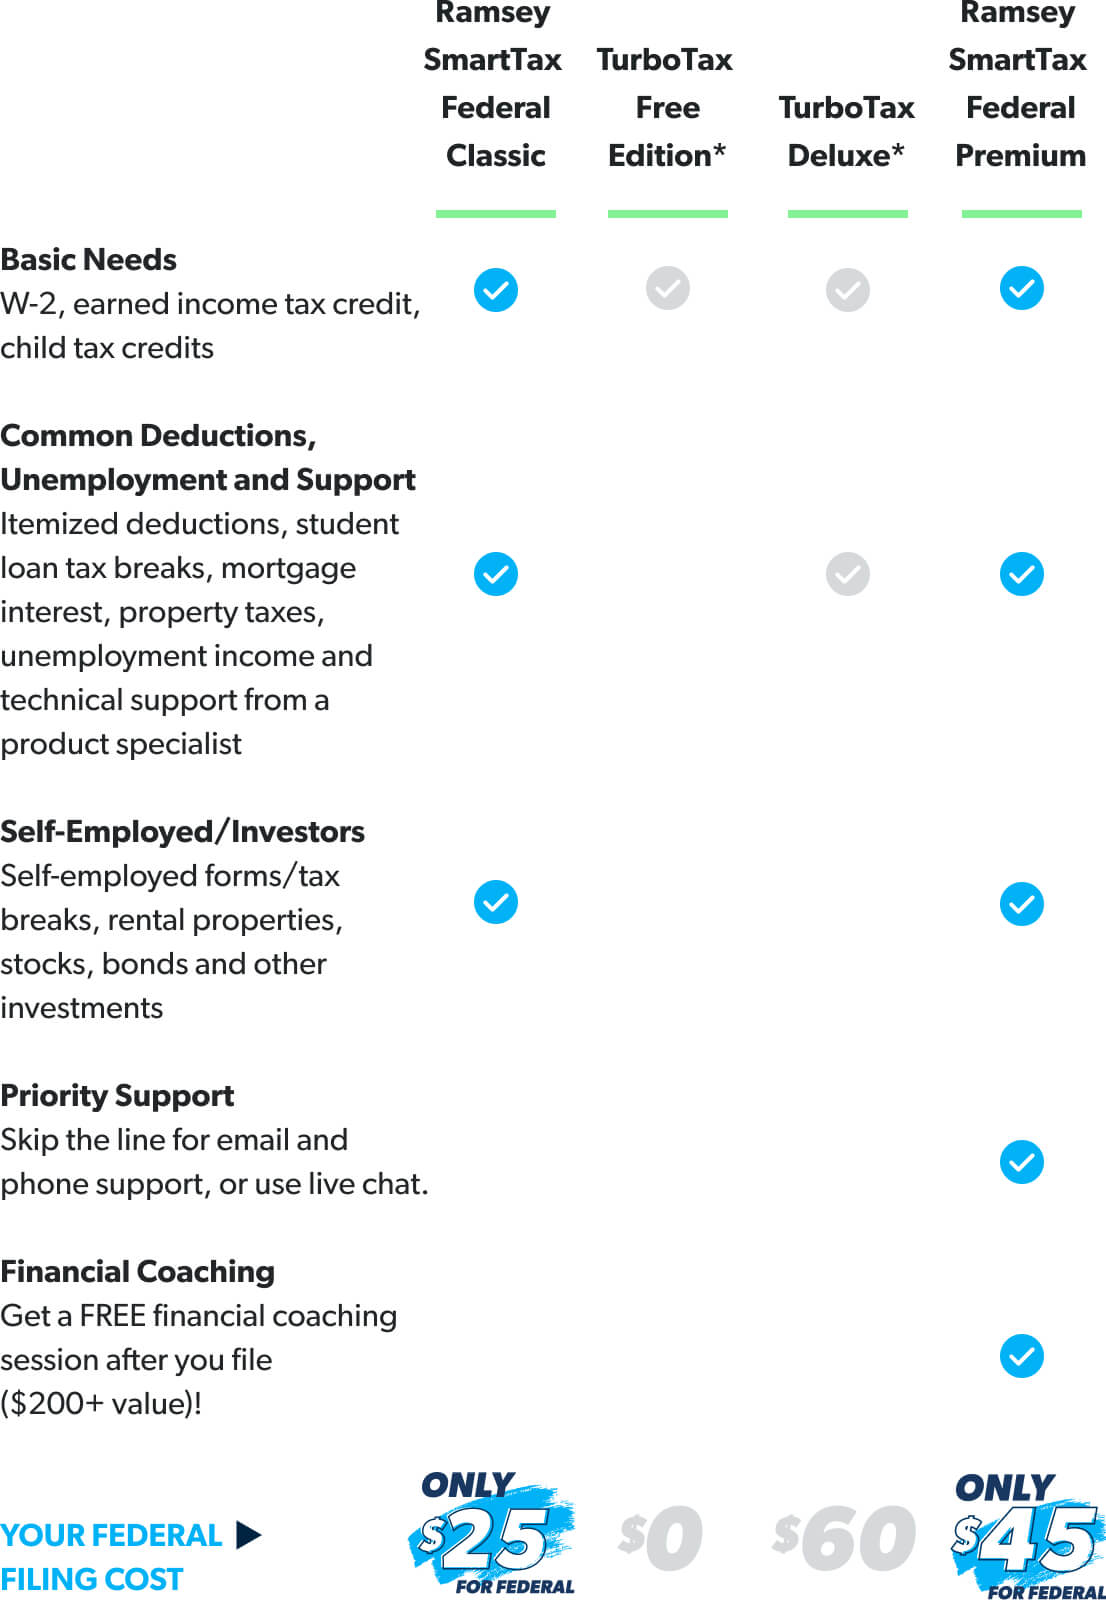 Comparison chart comparing Ramsey SmartTax to other tax software